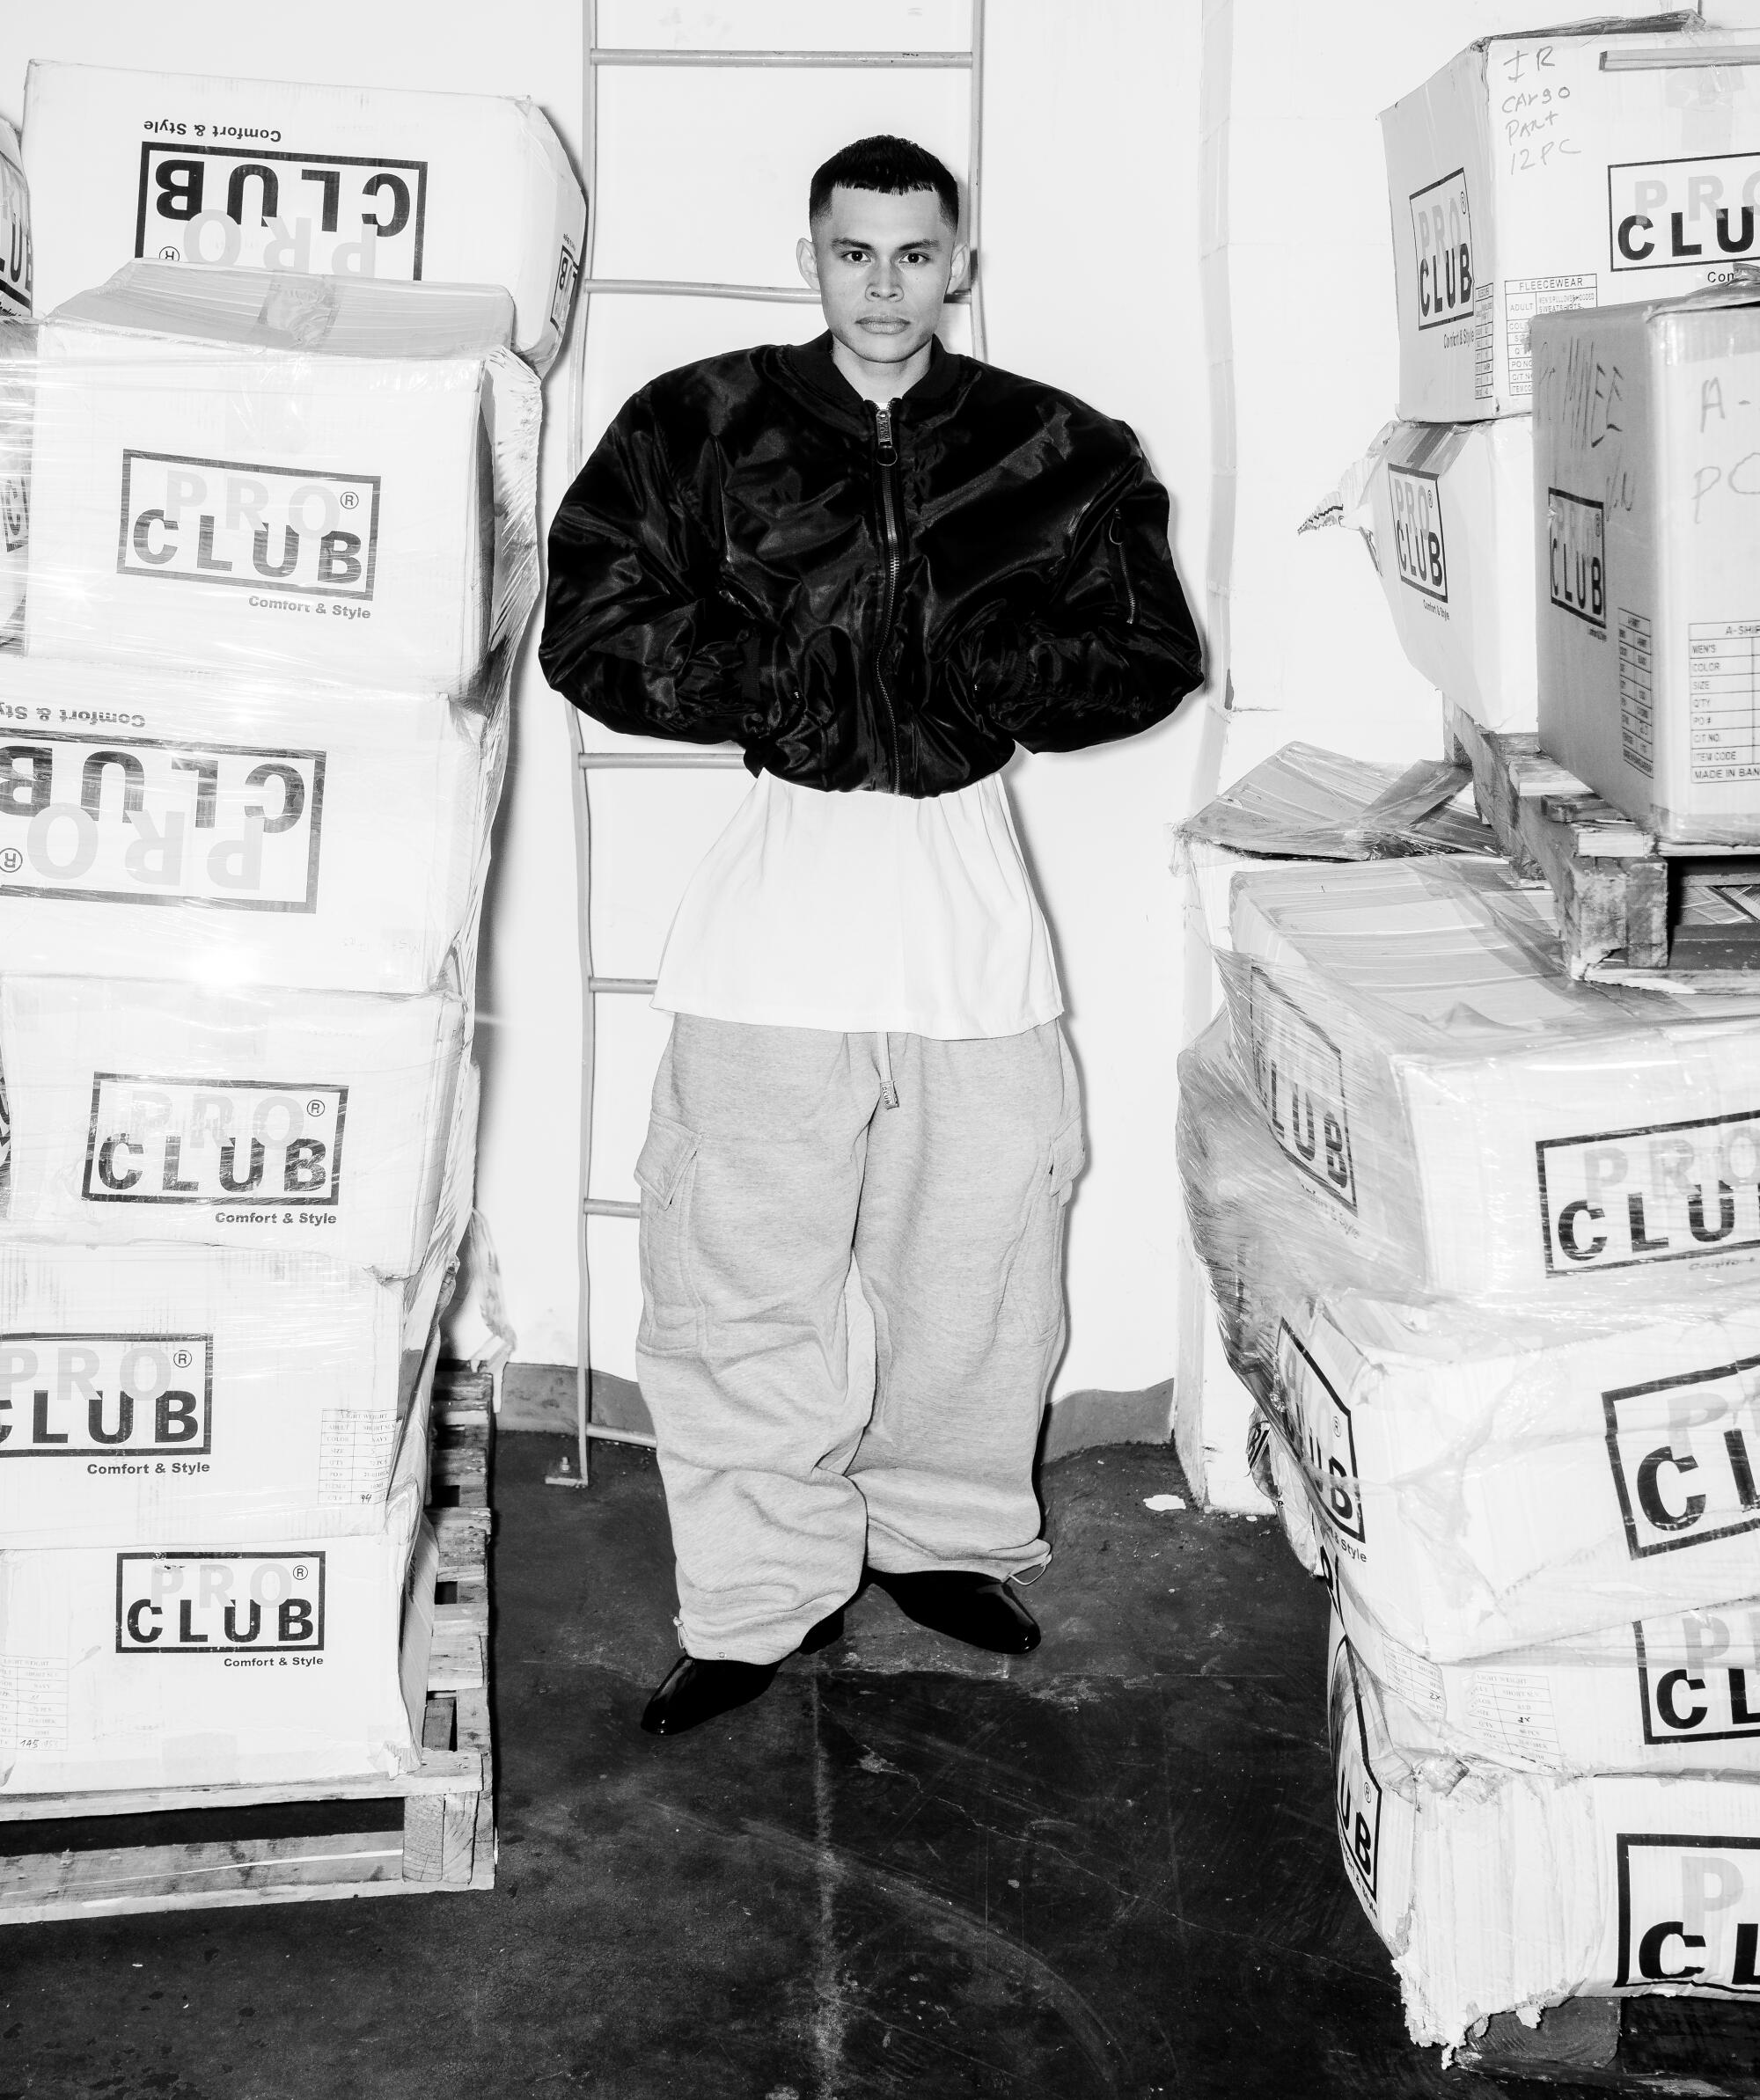 A model stands in the Pro Club warehouse.